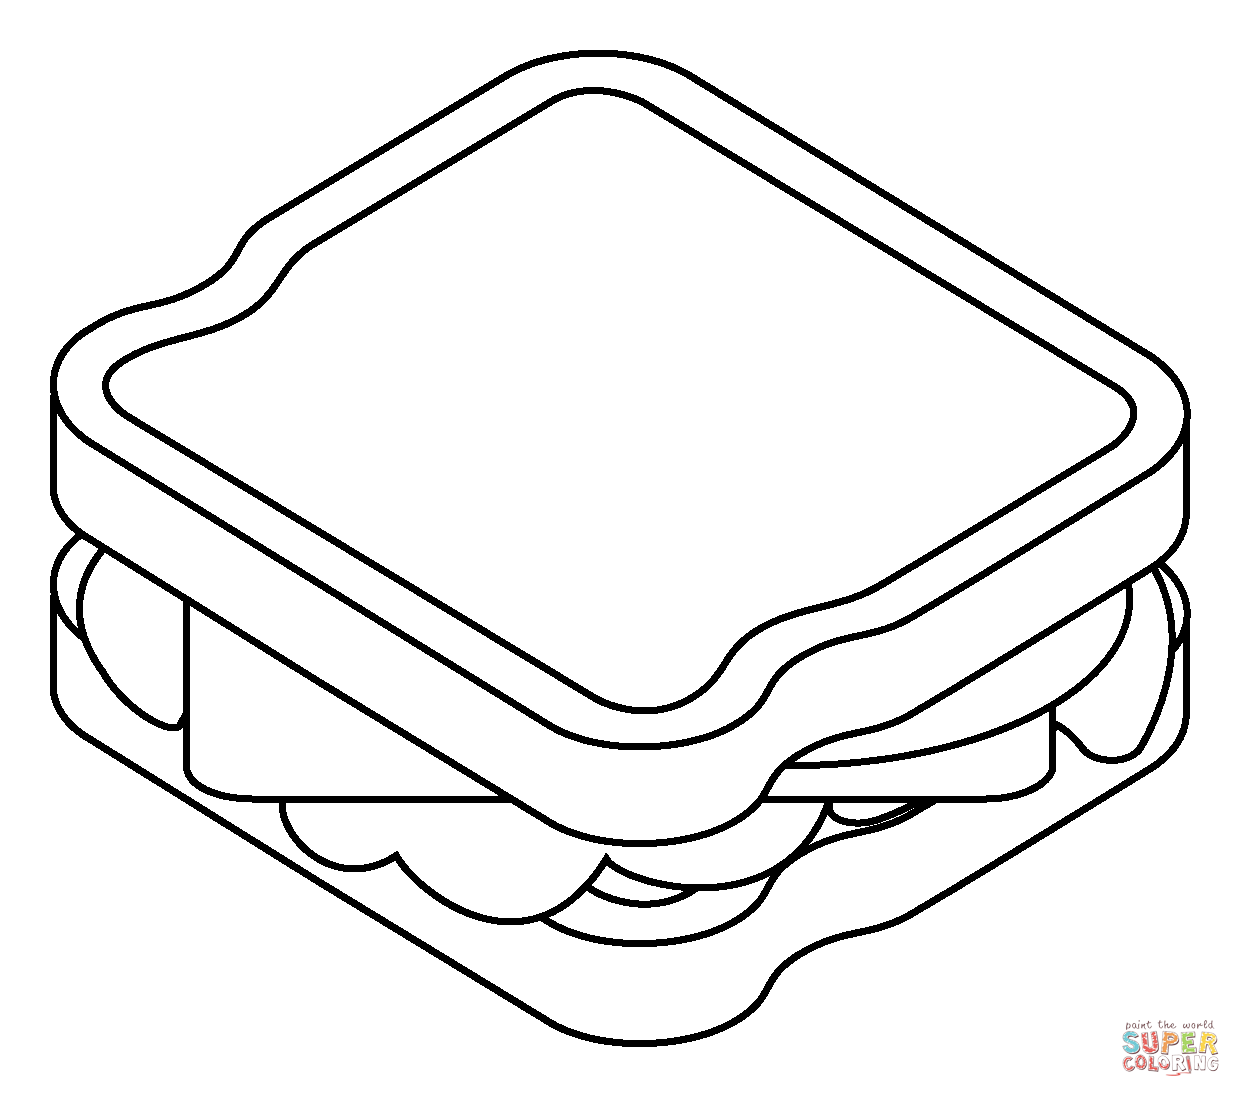 Sandwich emoji coloring page free printable coloring pages